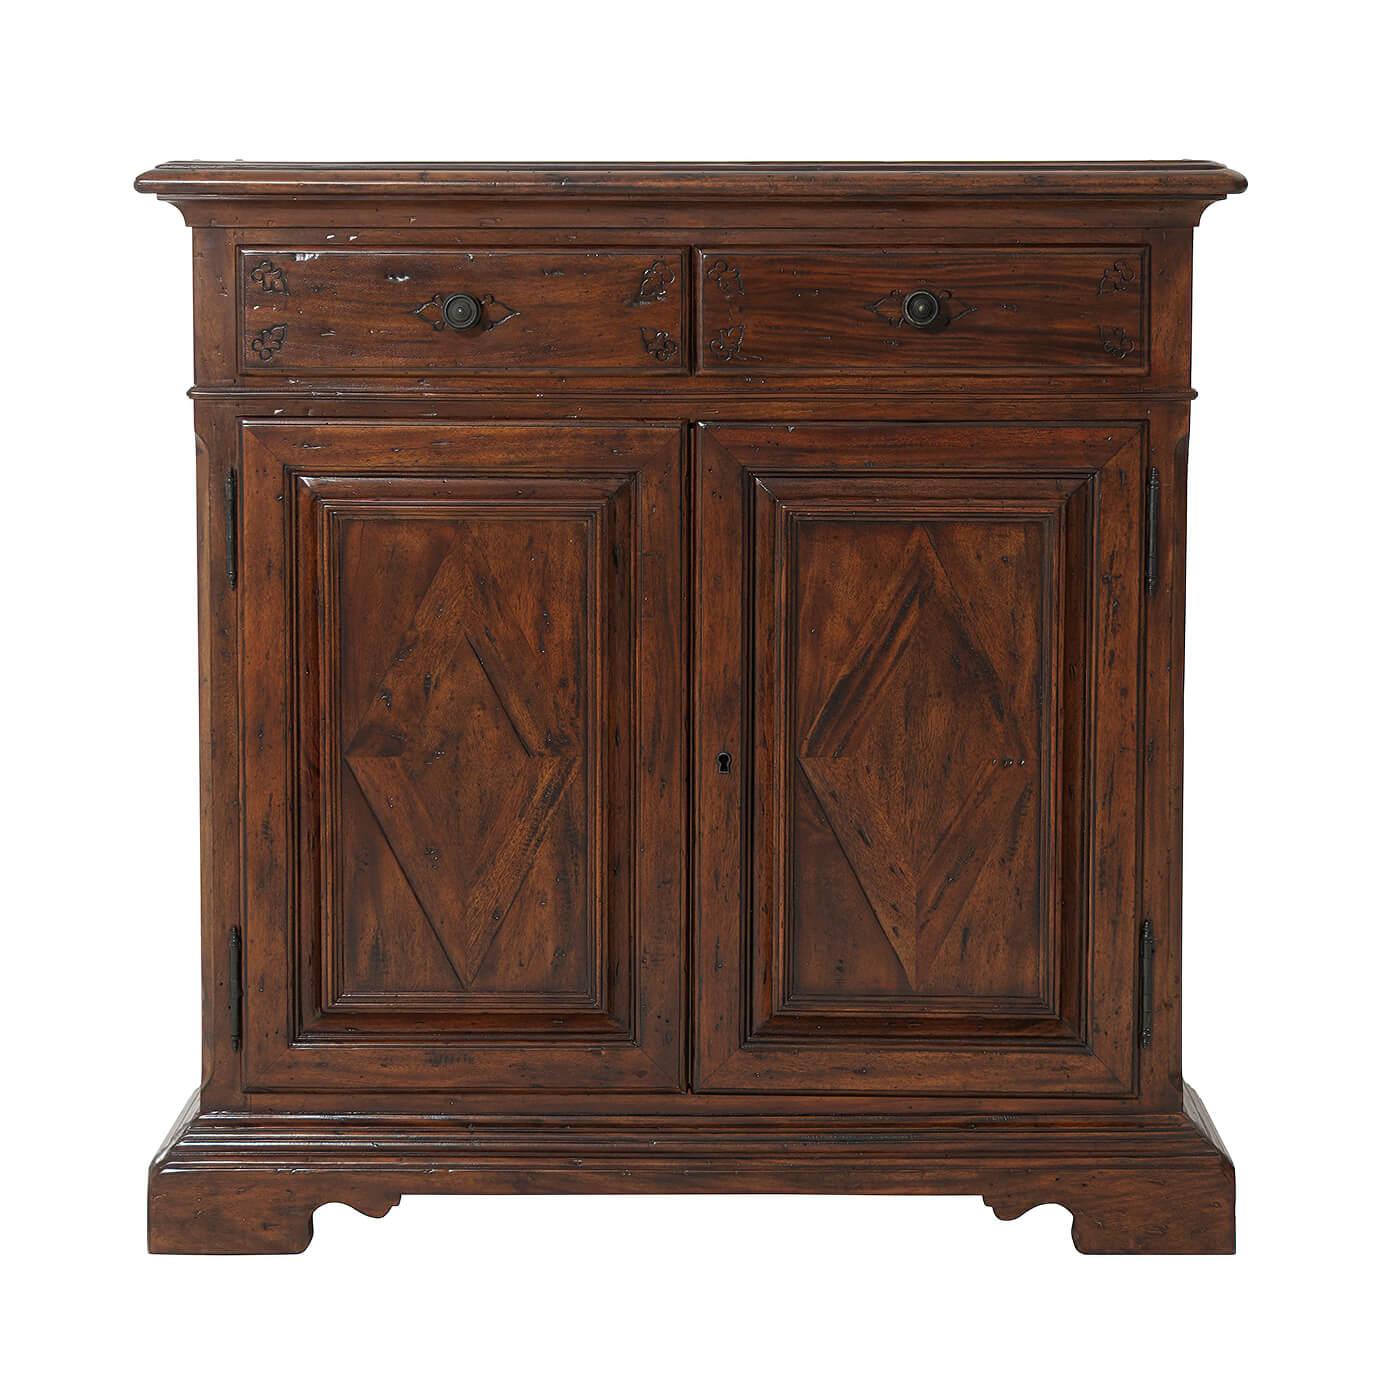 A George III style antiqued wood side cabinet, with two frieze drawers over two parquetry cabinet doors enclosing an adjustable shelf on a molded base with bracket feet. 

Dimensions: 37.75